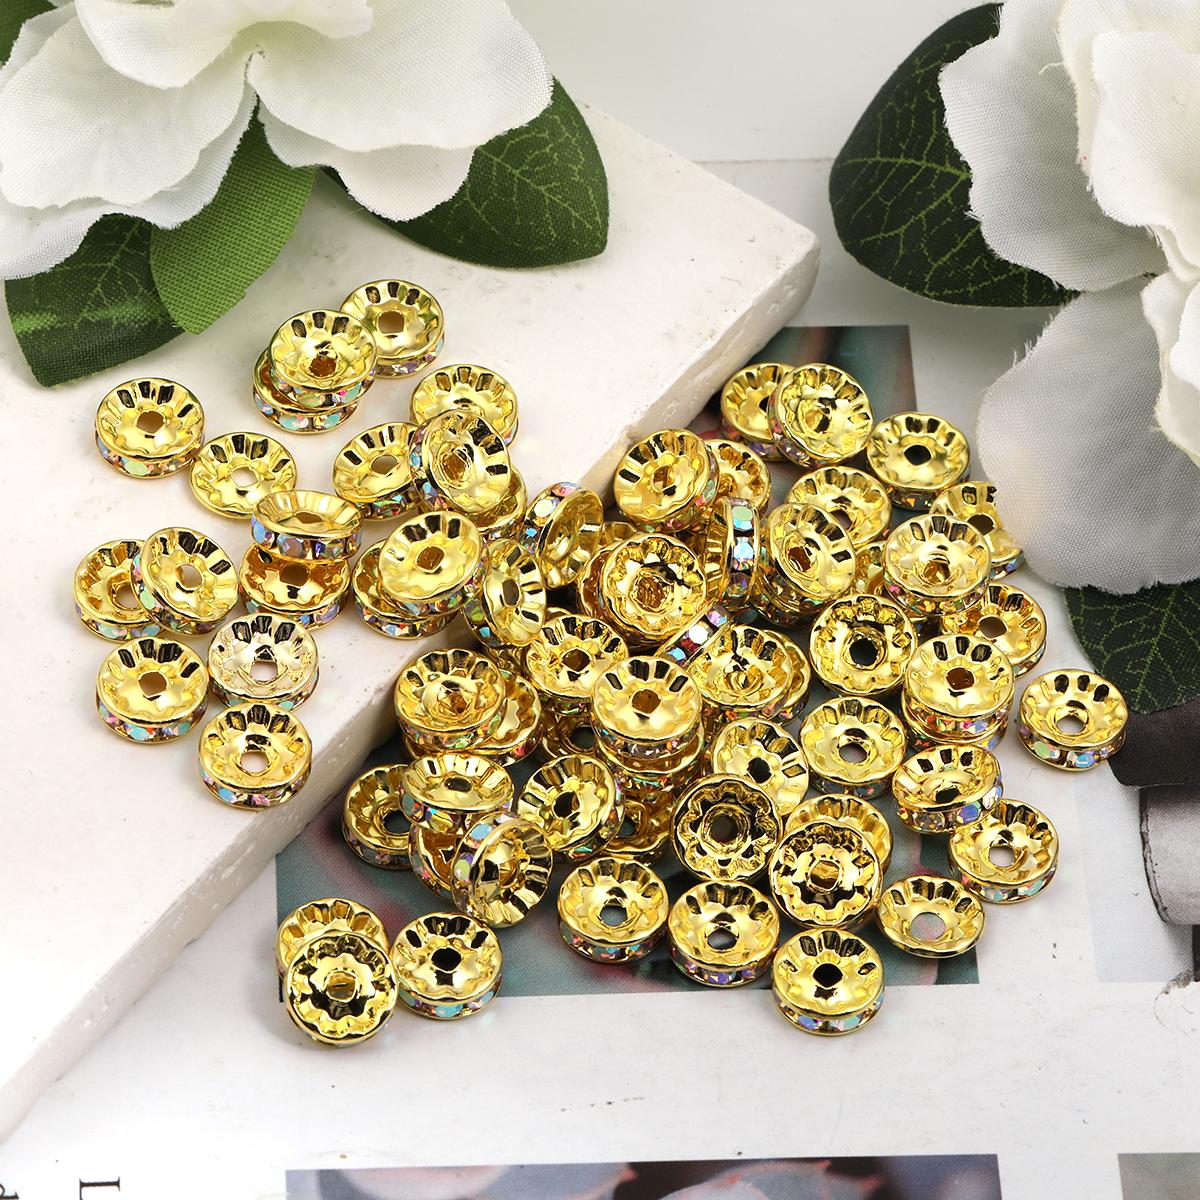 【B8】500pcs Rhinestone Spacer Beads for Jewelry Making, Rondelle Crystal -JPM